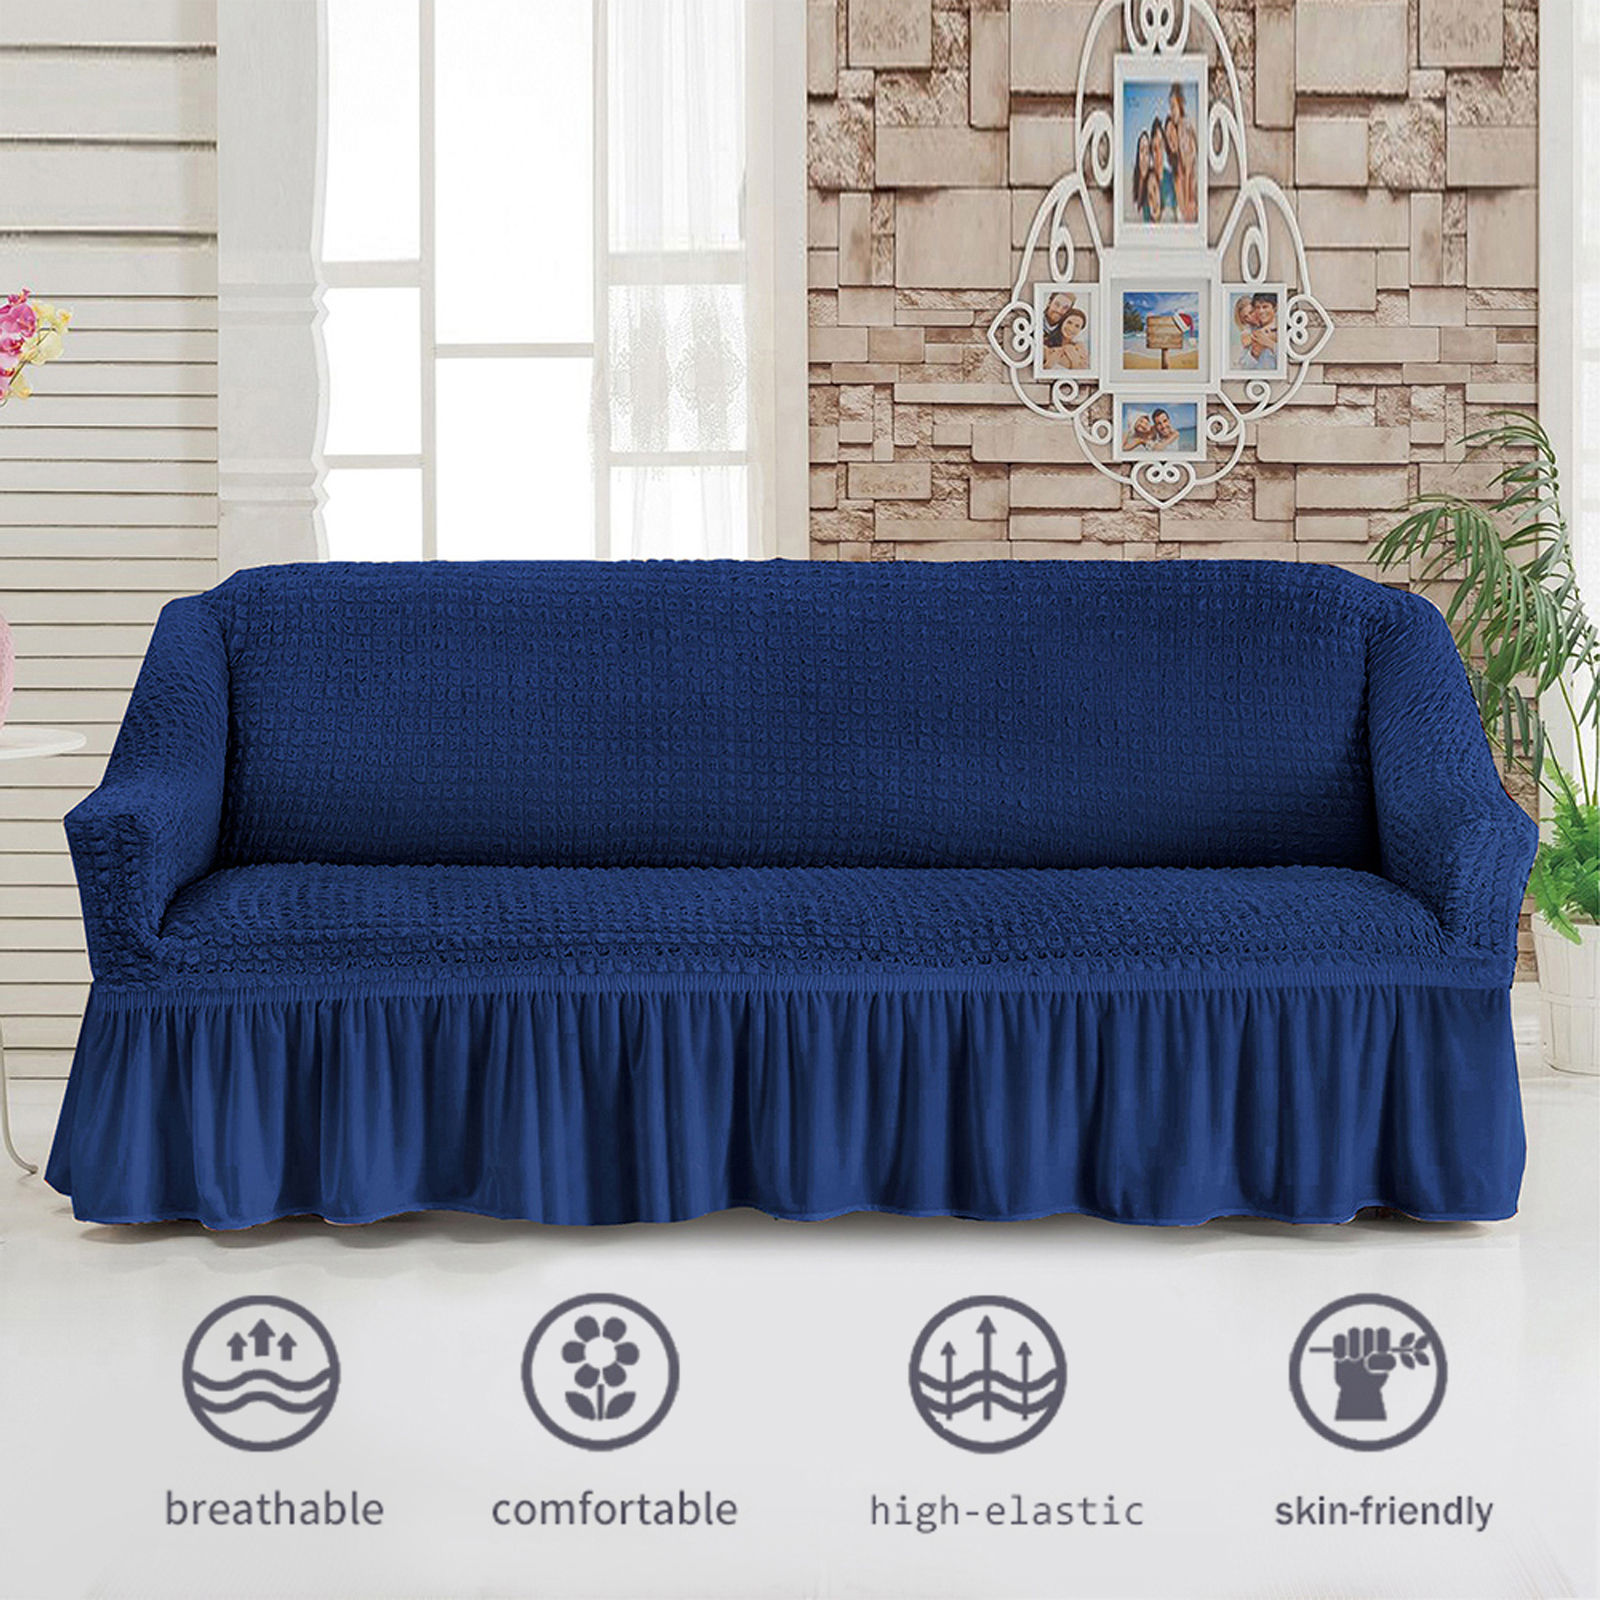 Stretch Sofa Slipcover, 3 Seater Sofa Slipcovers With Skirt With Armless Soft Sofa Cover Elastic Straps Sofa Slipcover For Living Room Kids Pets-blue-Large